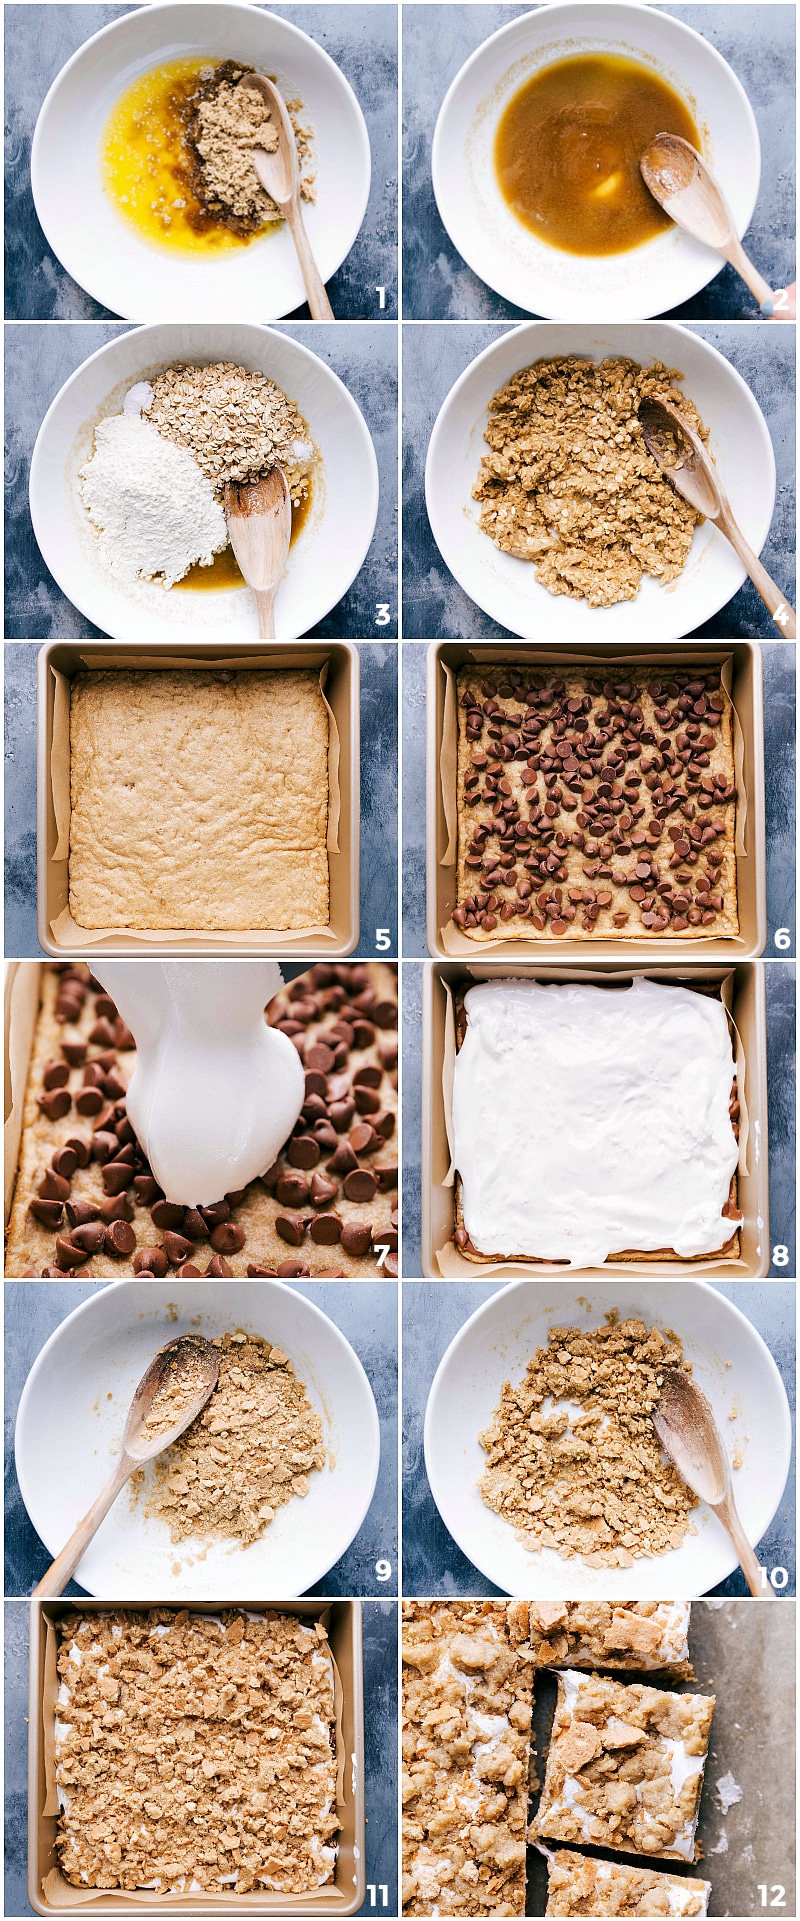 Process shots-- images of cookie layer being made and then put in the prepared pan, then baked, and the chocolate chips and Marshmallow Fluff being added on top. Then images of the crumble topping being put on top and baked ready to be eaten. And finally a finished shot of the s'mores cookie bars.